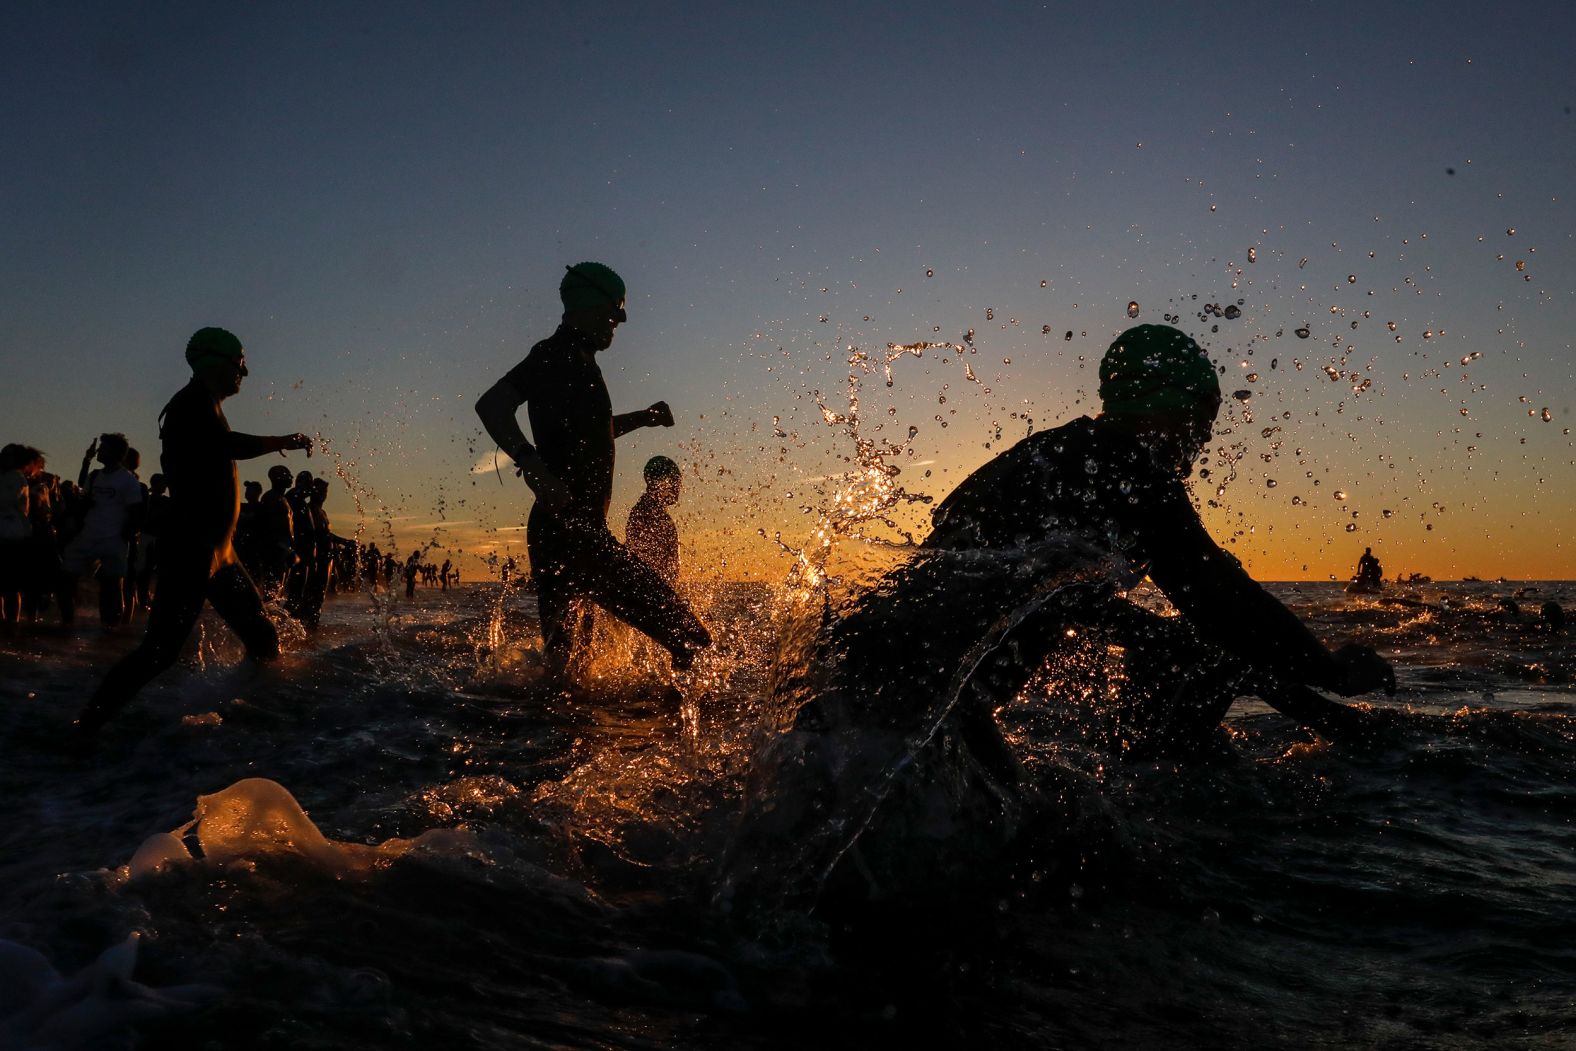 Athletes compete during the swimming leg of an Ironman competition in Calella, Spain, on Sunday, October 2. <a href="https://www.cnn.com/2022/09/29/world/gallery/photos-this-week-september-22-september-29" target="_blank">See last week in 36 photos.</a>